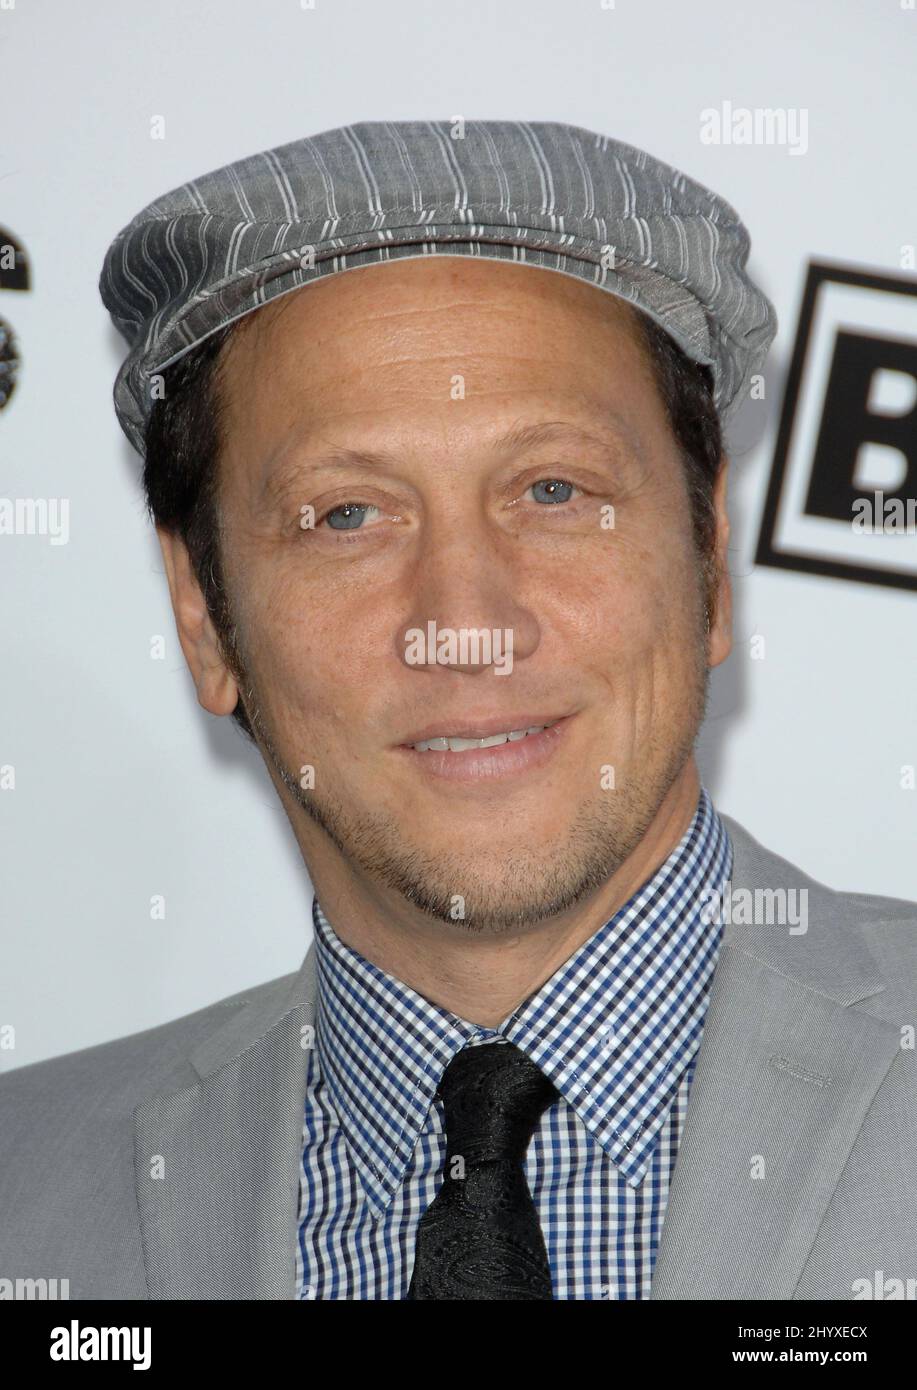 Rob Schneider at the Expendables premiere held at Grauman's Chinese Theatre, Los Angeles. Stock Photo